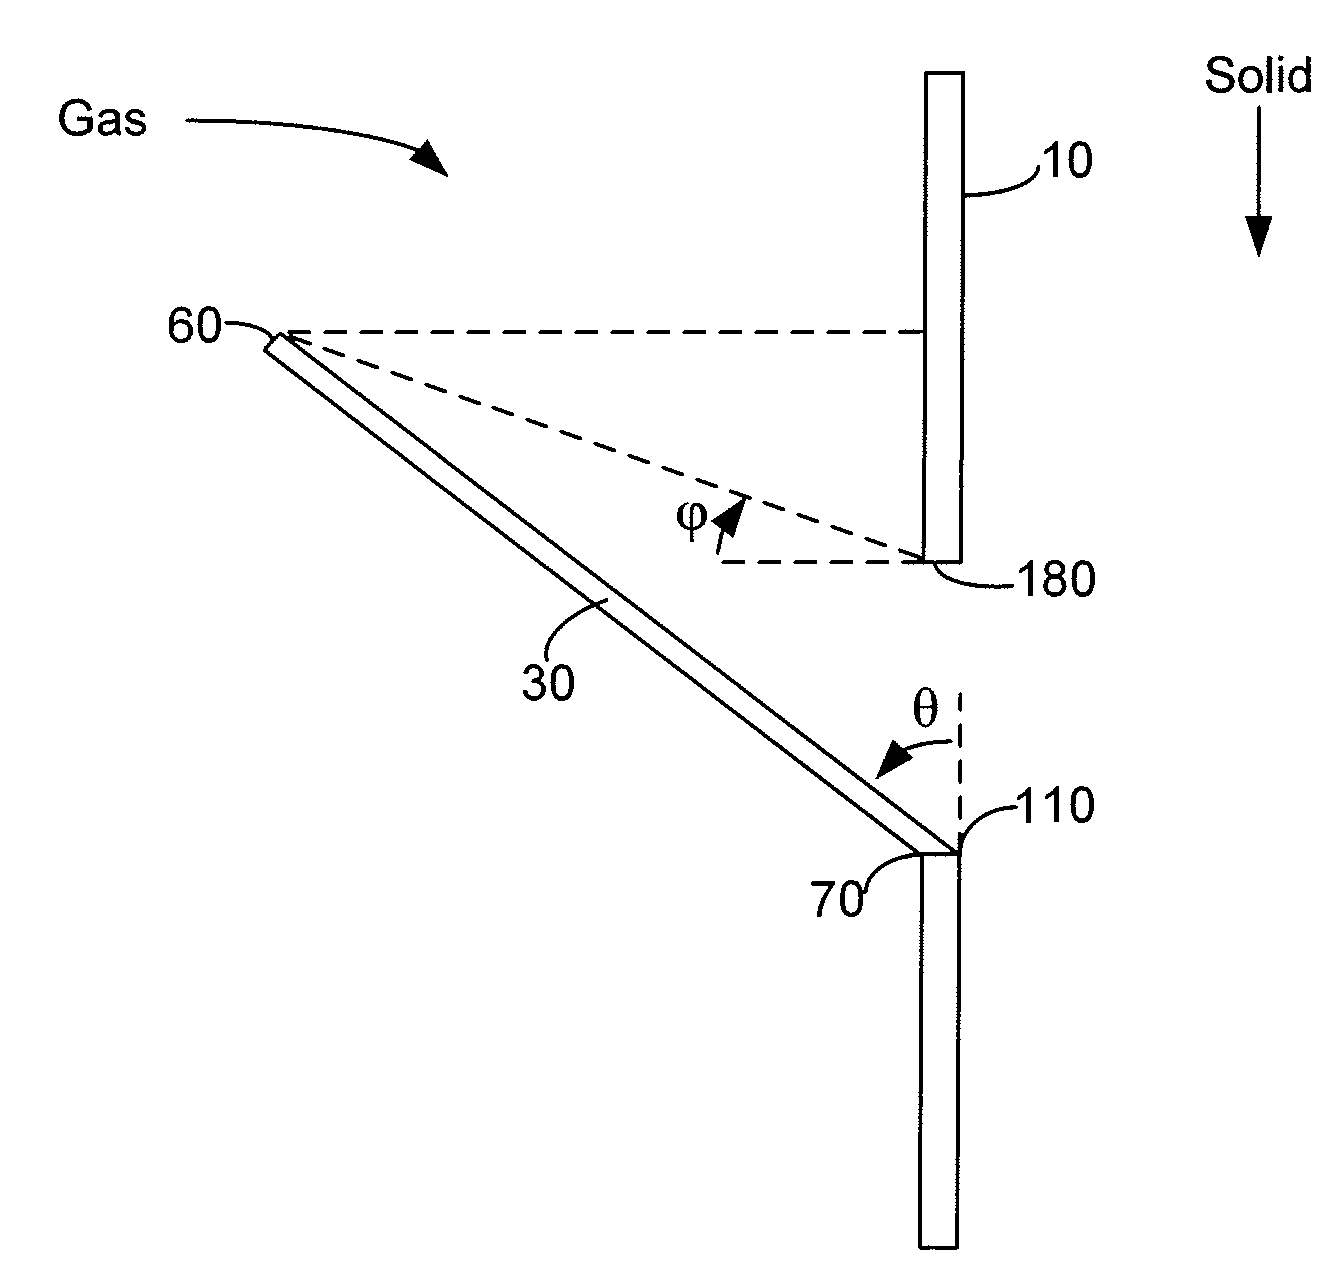 Conically shaped screenless internals for radial flow reactors